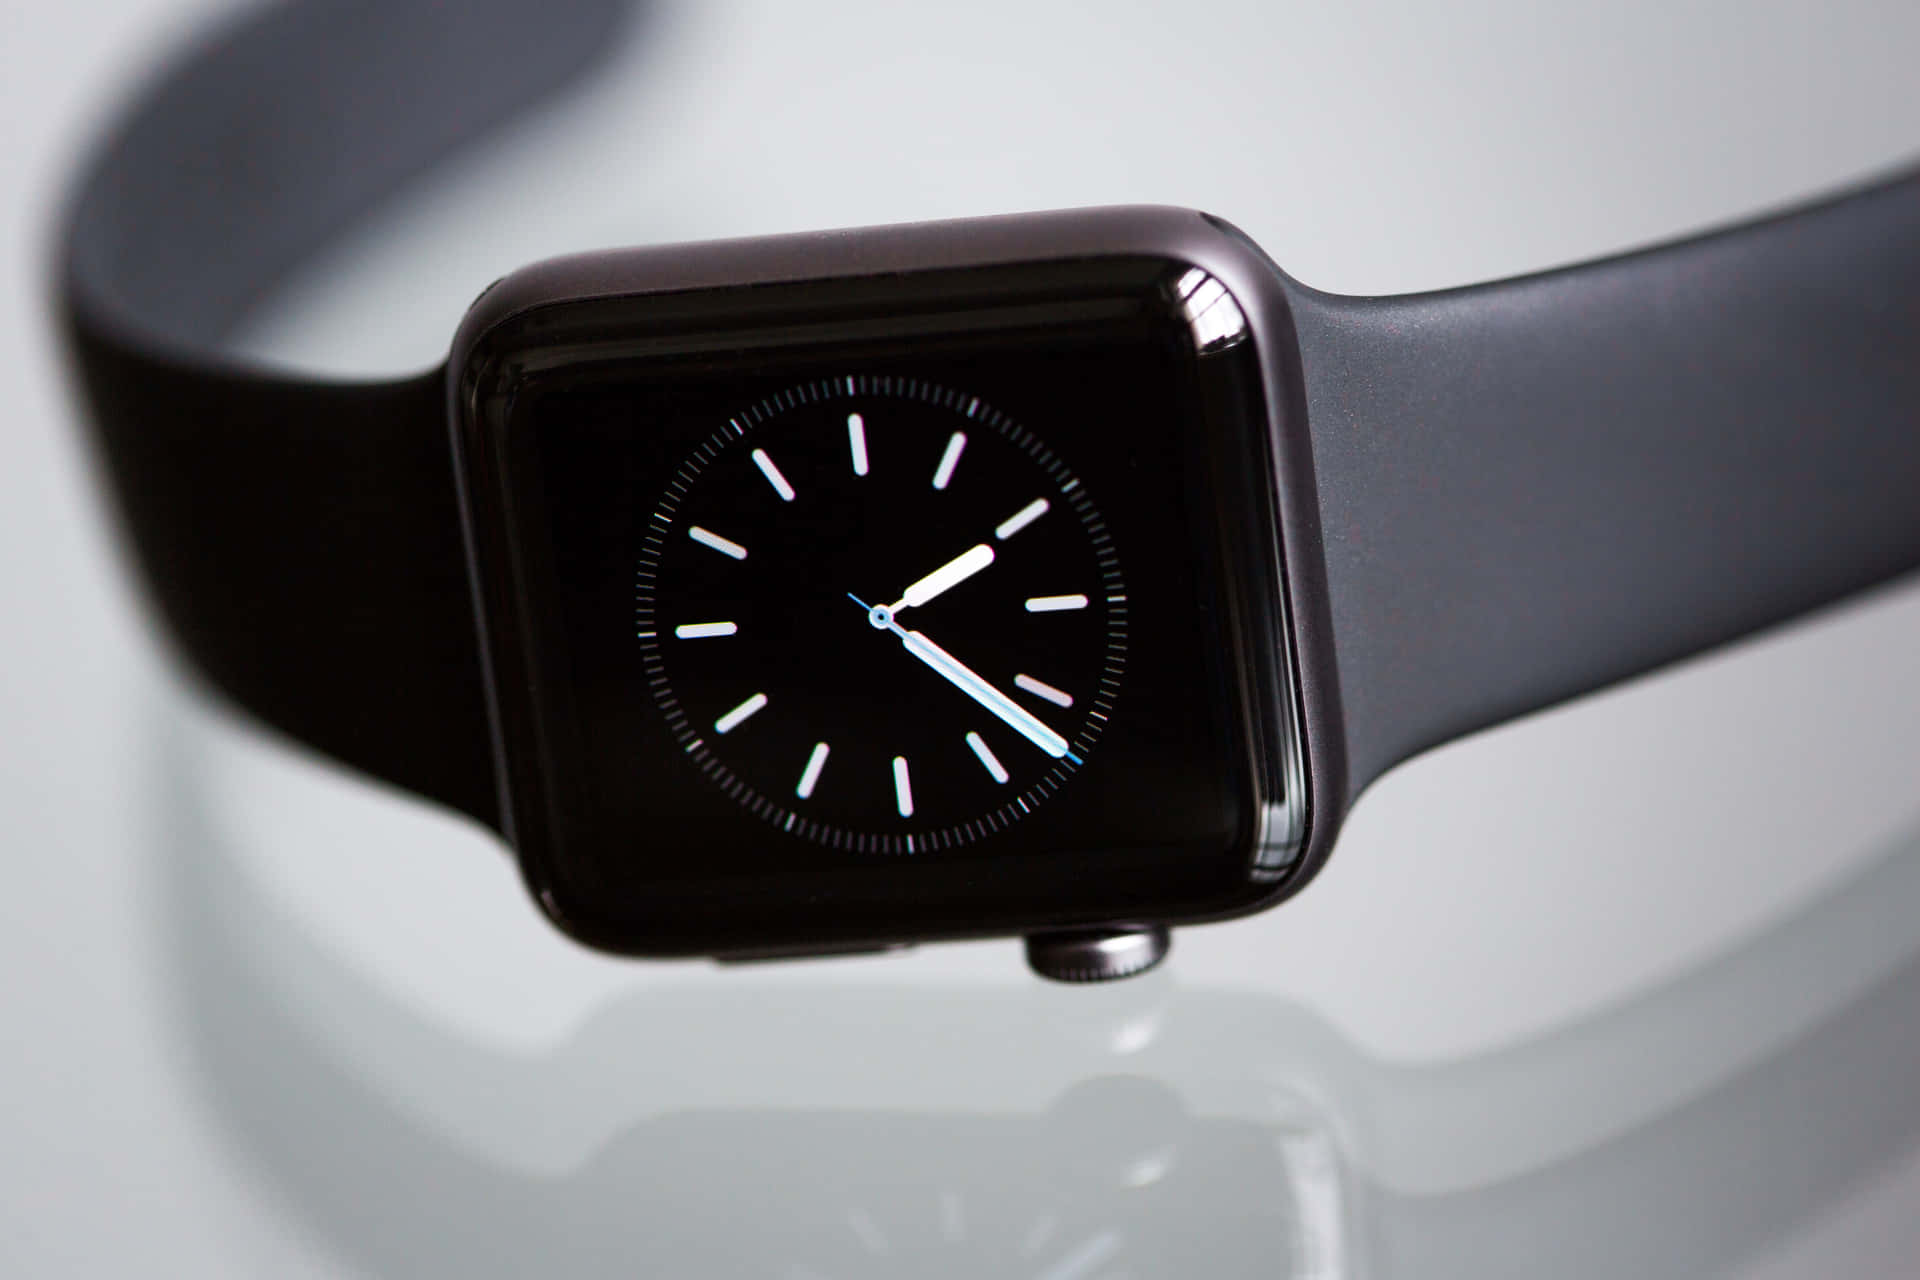 The Apple Watch - the latest in smart watch technology